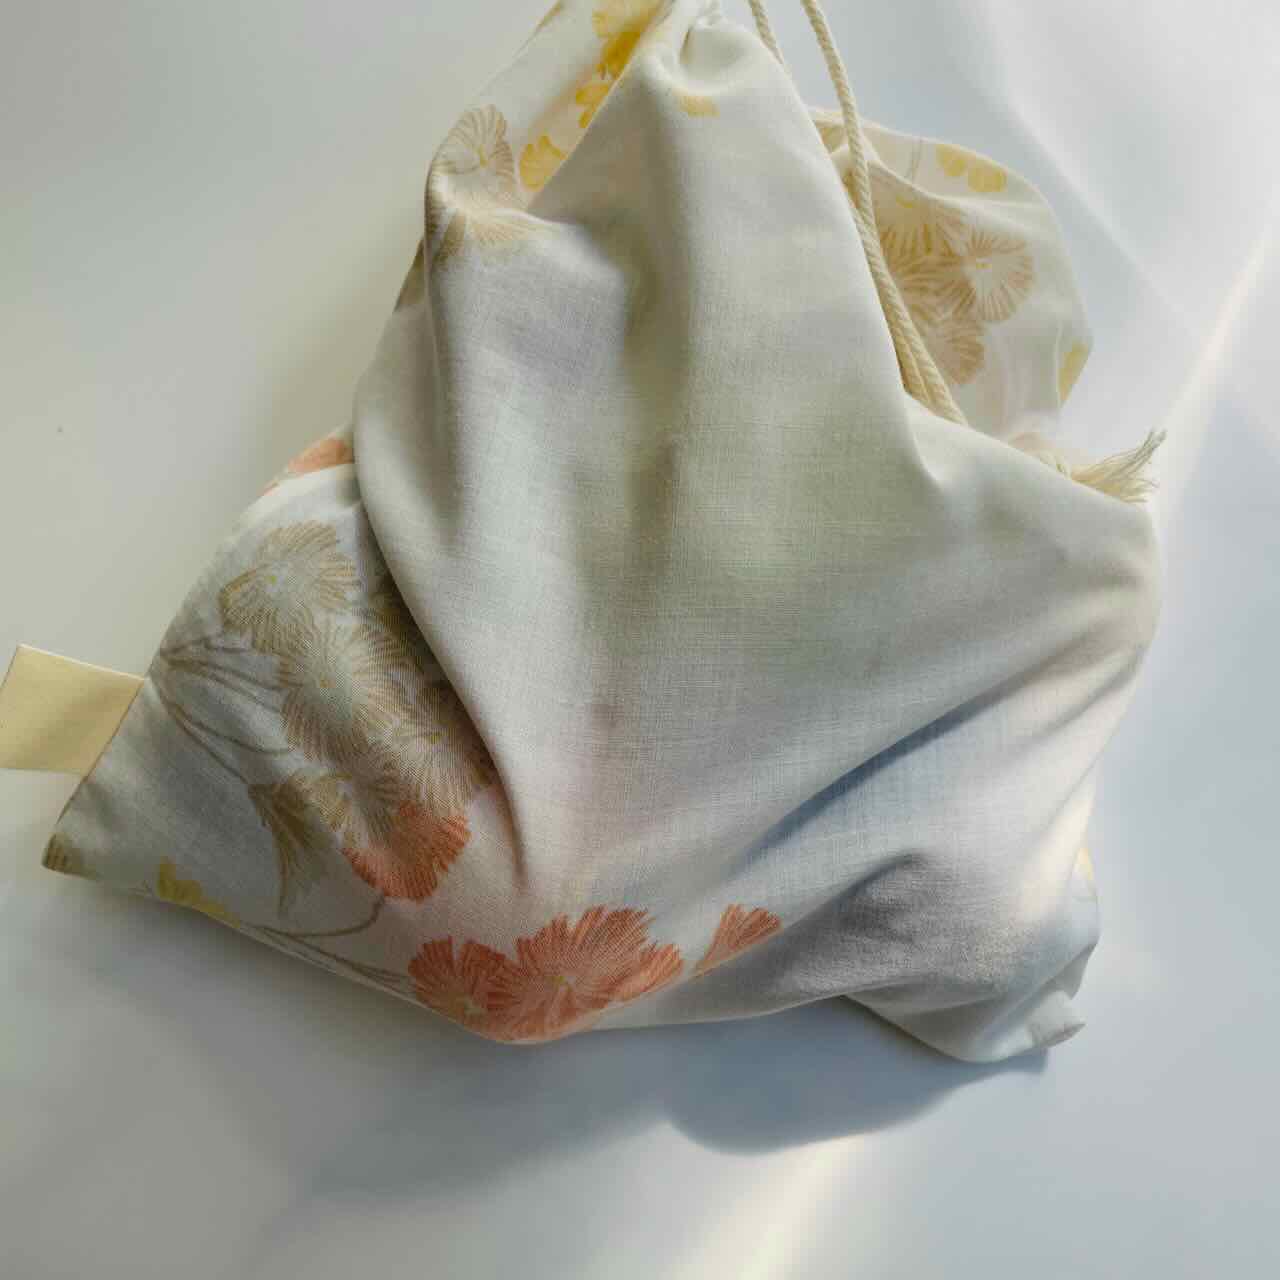 Upcycled Fabric Reusable Produce Bag - Wildflower